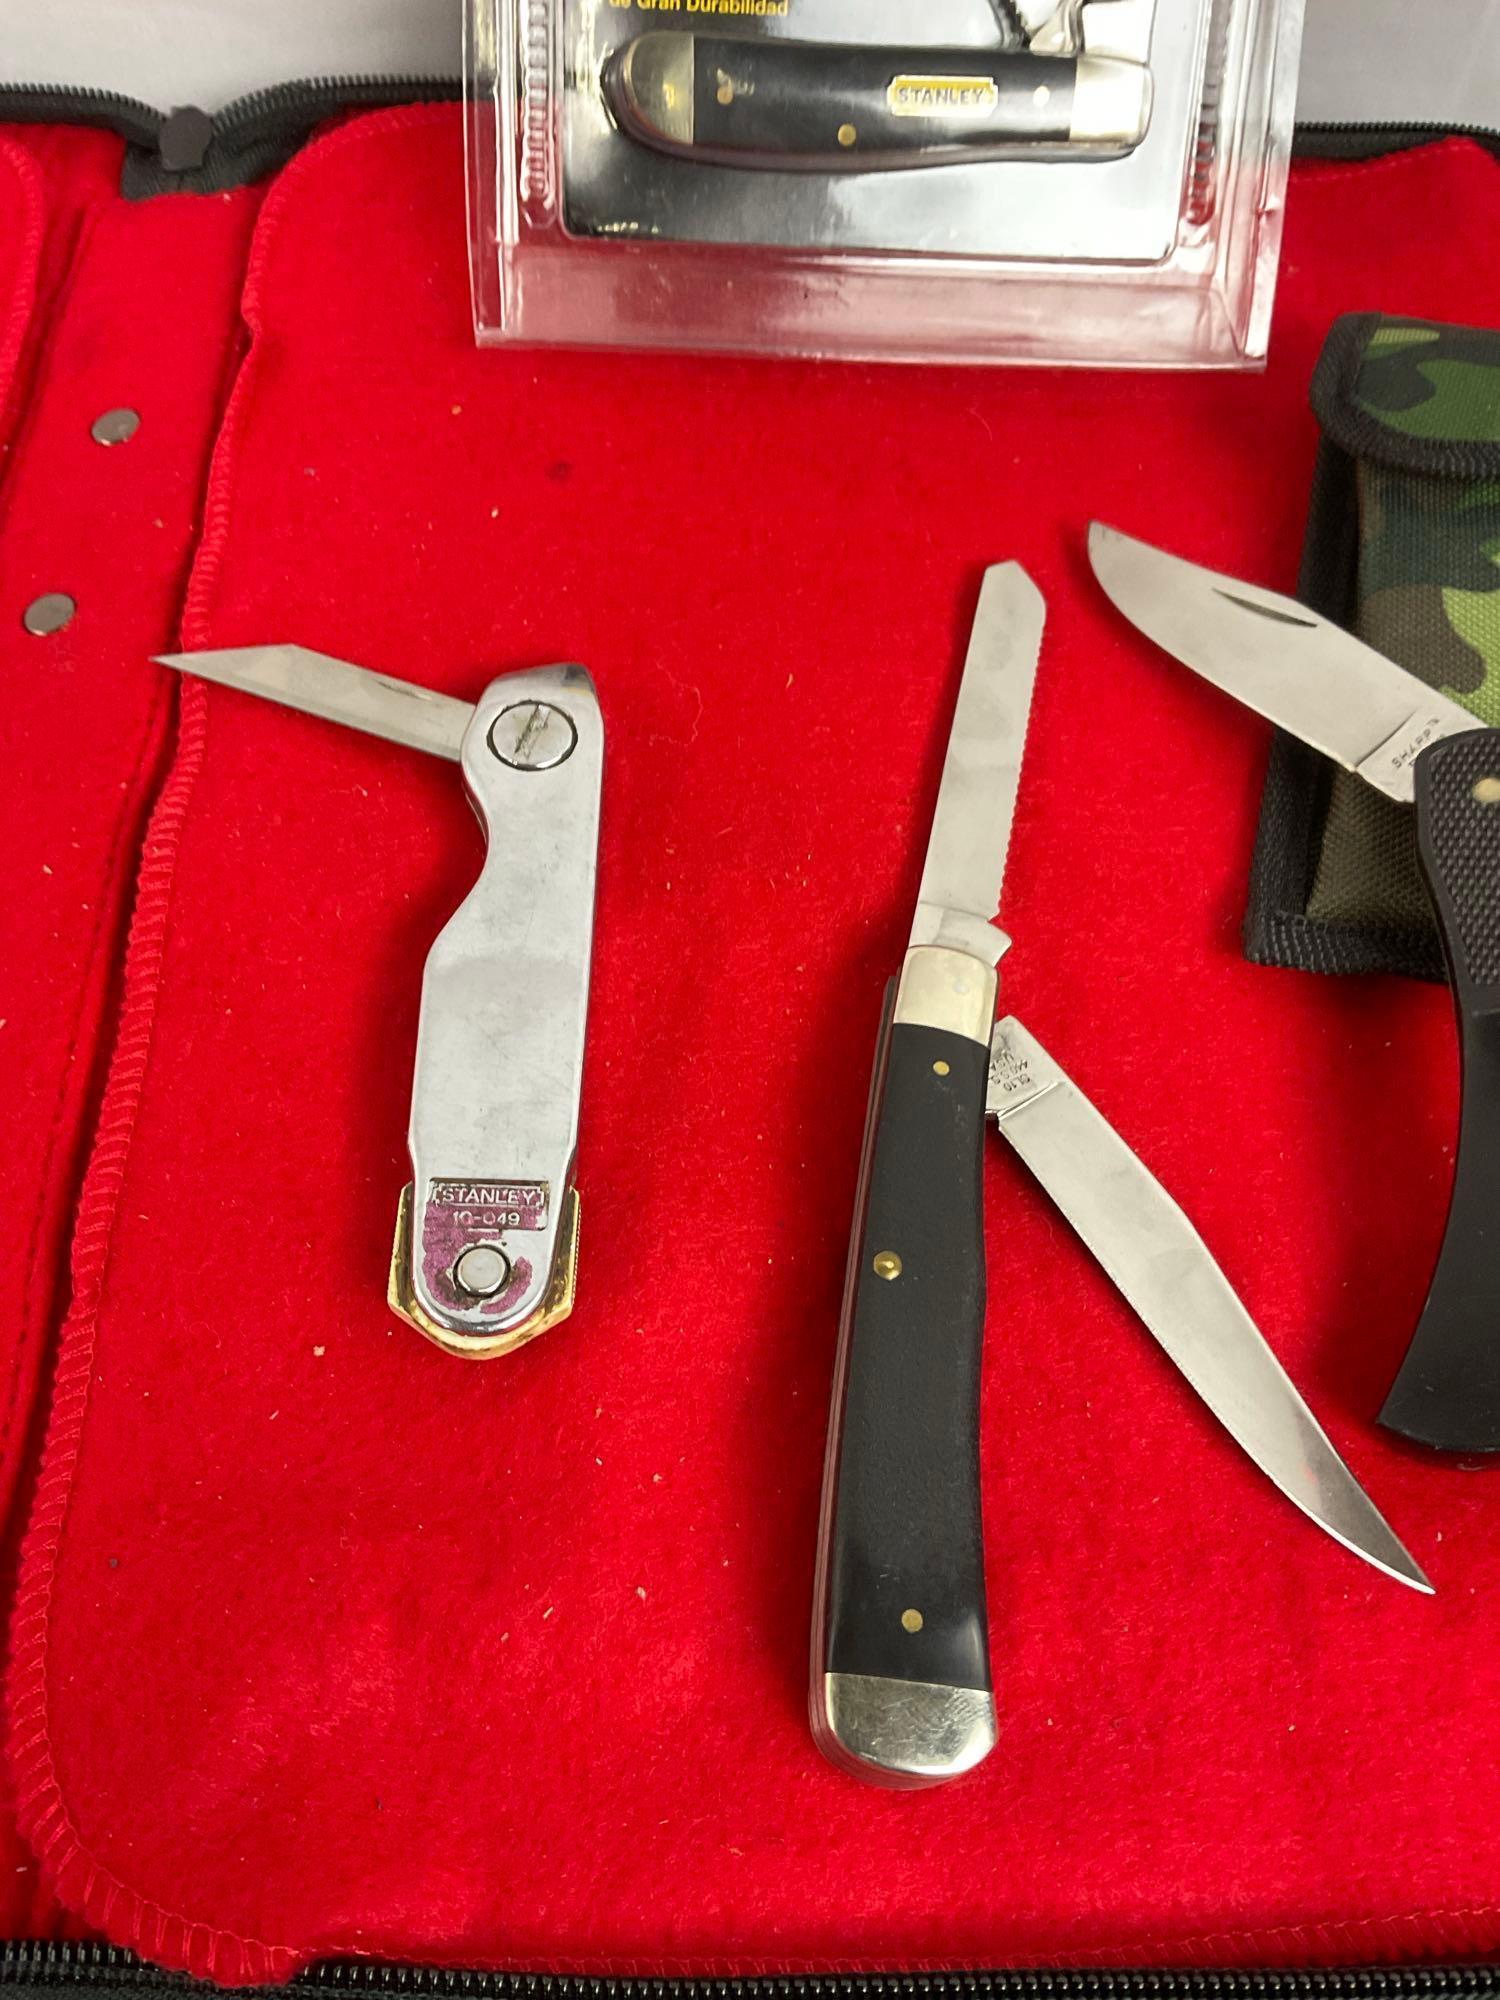 Collection of 3 Stanley Folding Pocket Knives & 1 Sharp Knife - 2x Max Edge Dual Blade Knives